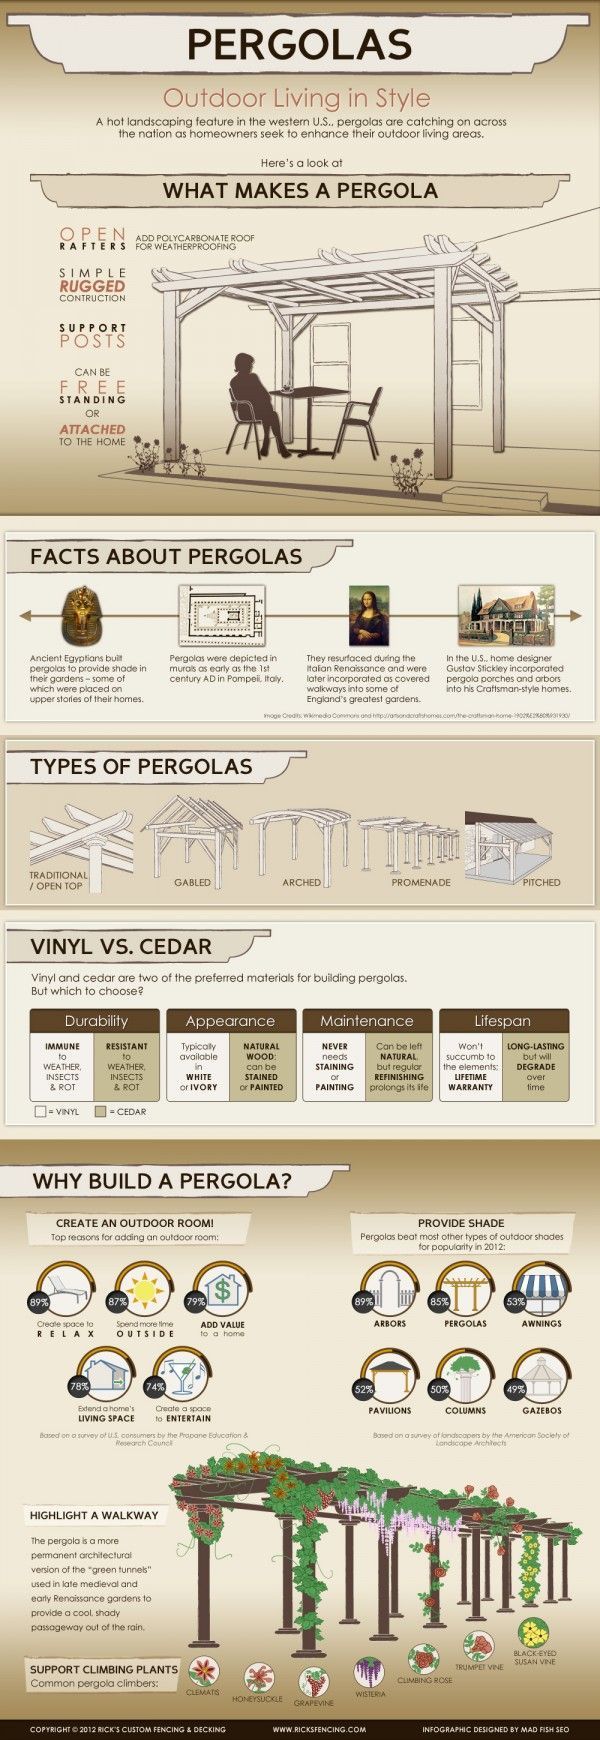 One trendy landscaping feature that many people are getting for their outdoor areas, are Pergolas.  This infographic takes a look